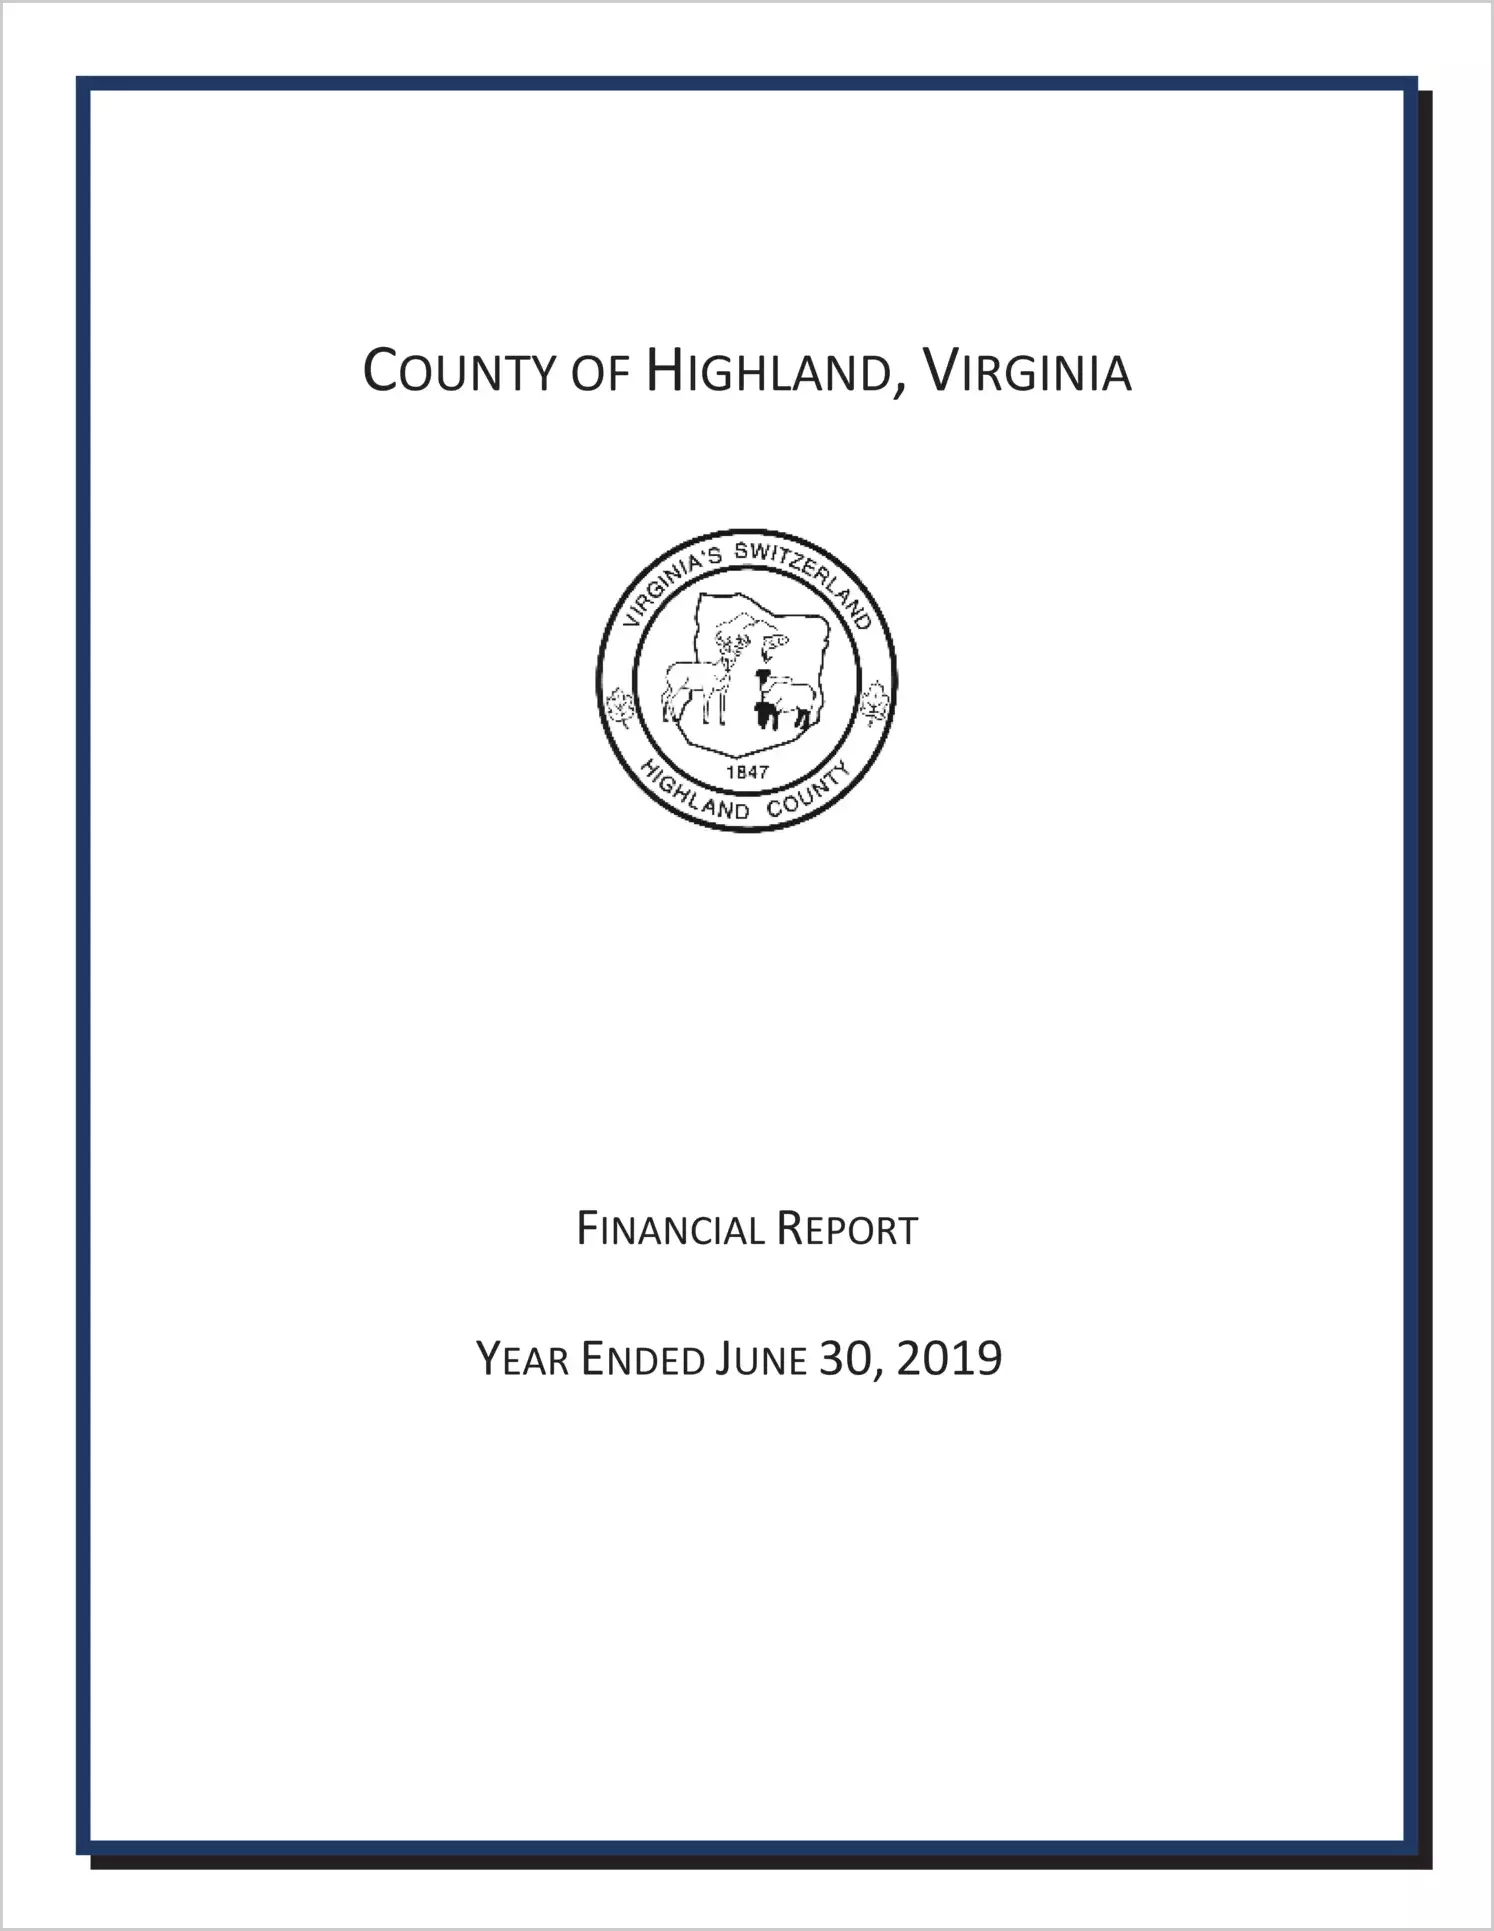 2019 Annual Financial Report for County of Highland